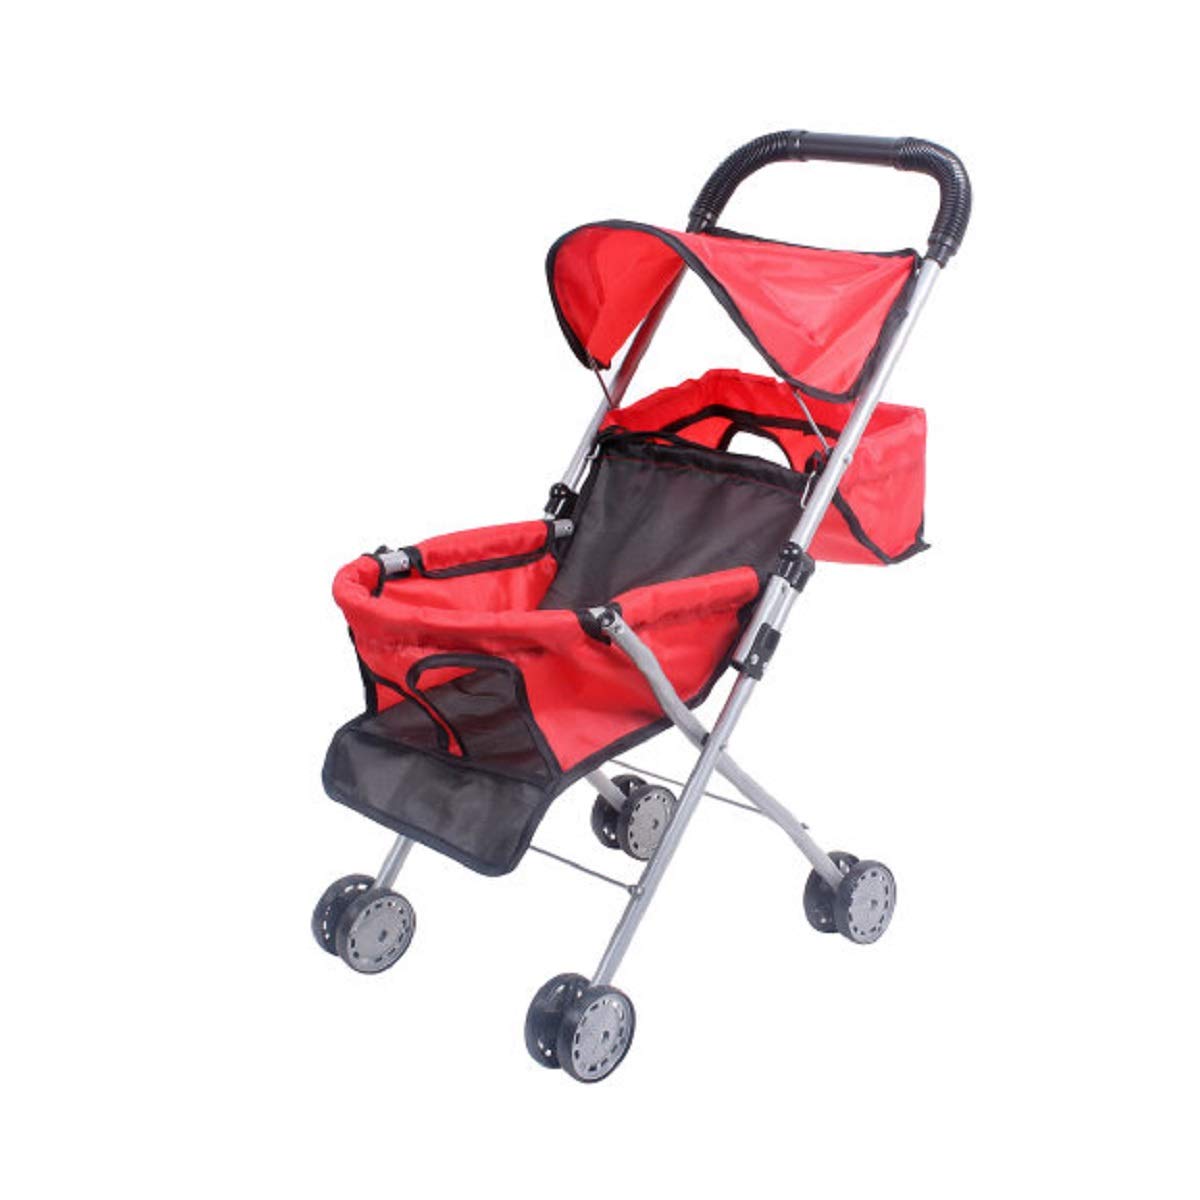 GCI Red Polka Dot Lightweight Baby Doll Foldable Compact Stroller